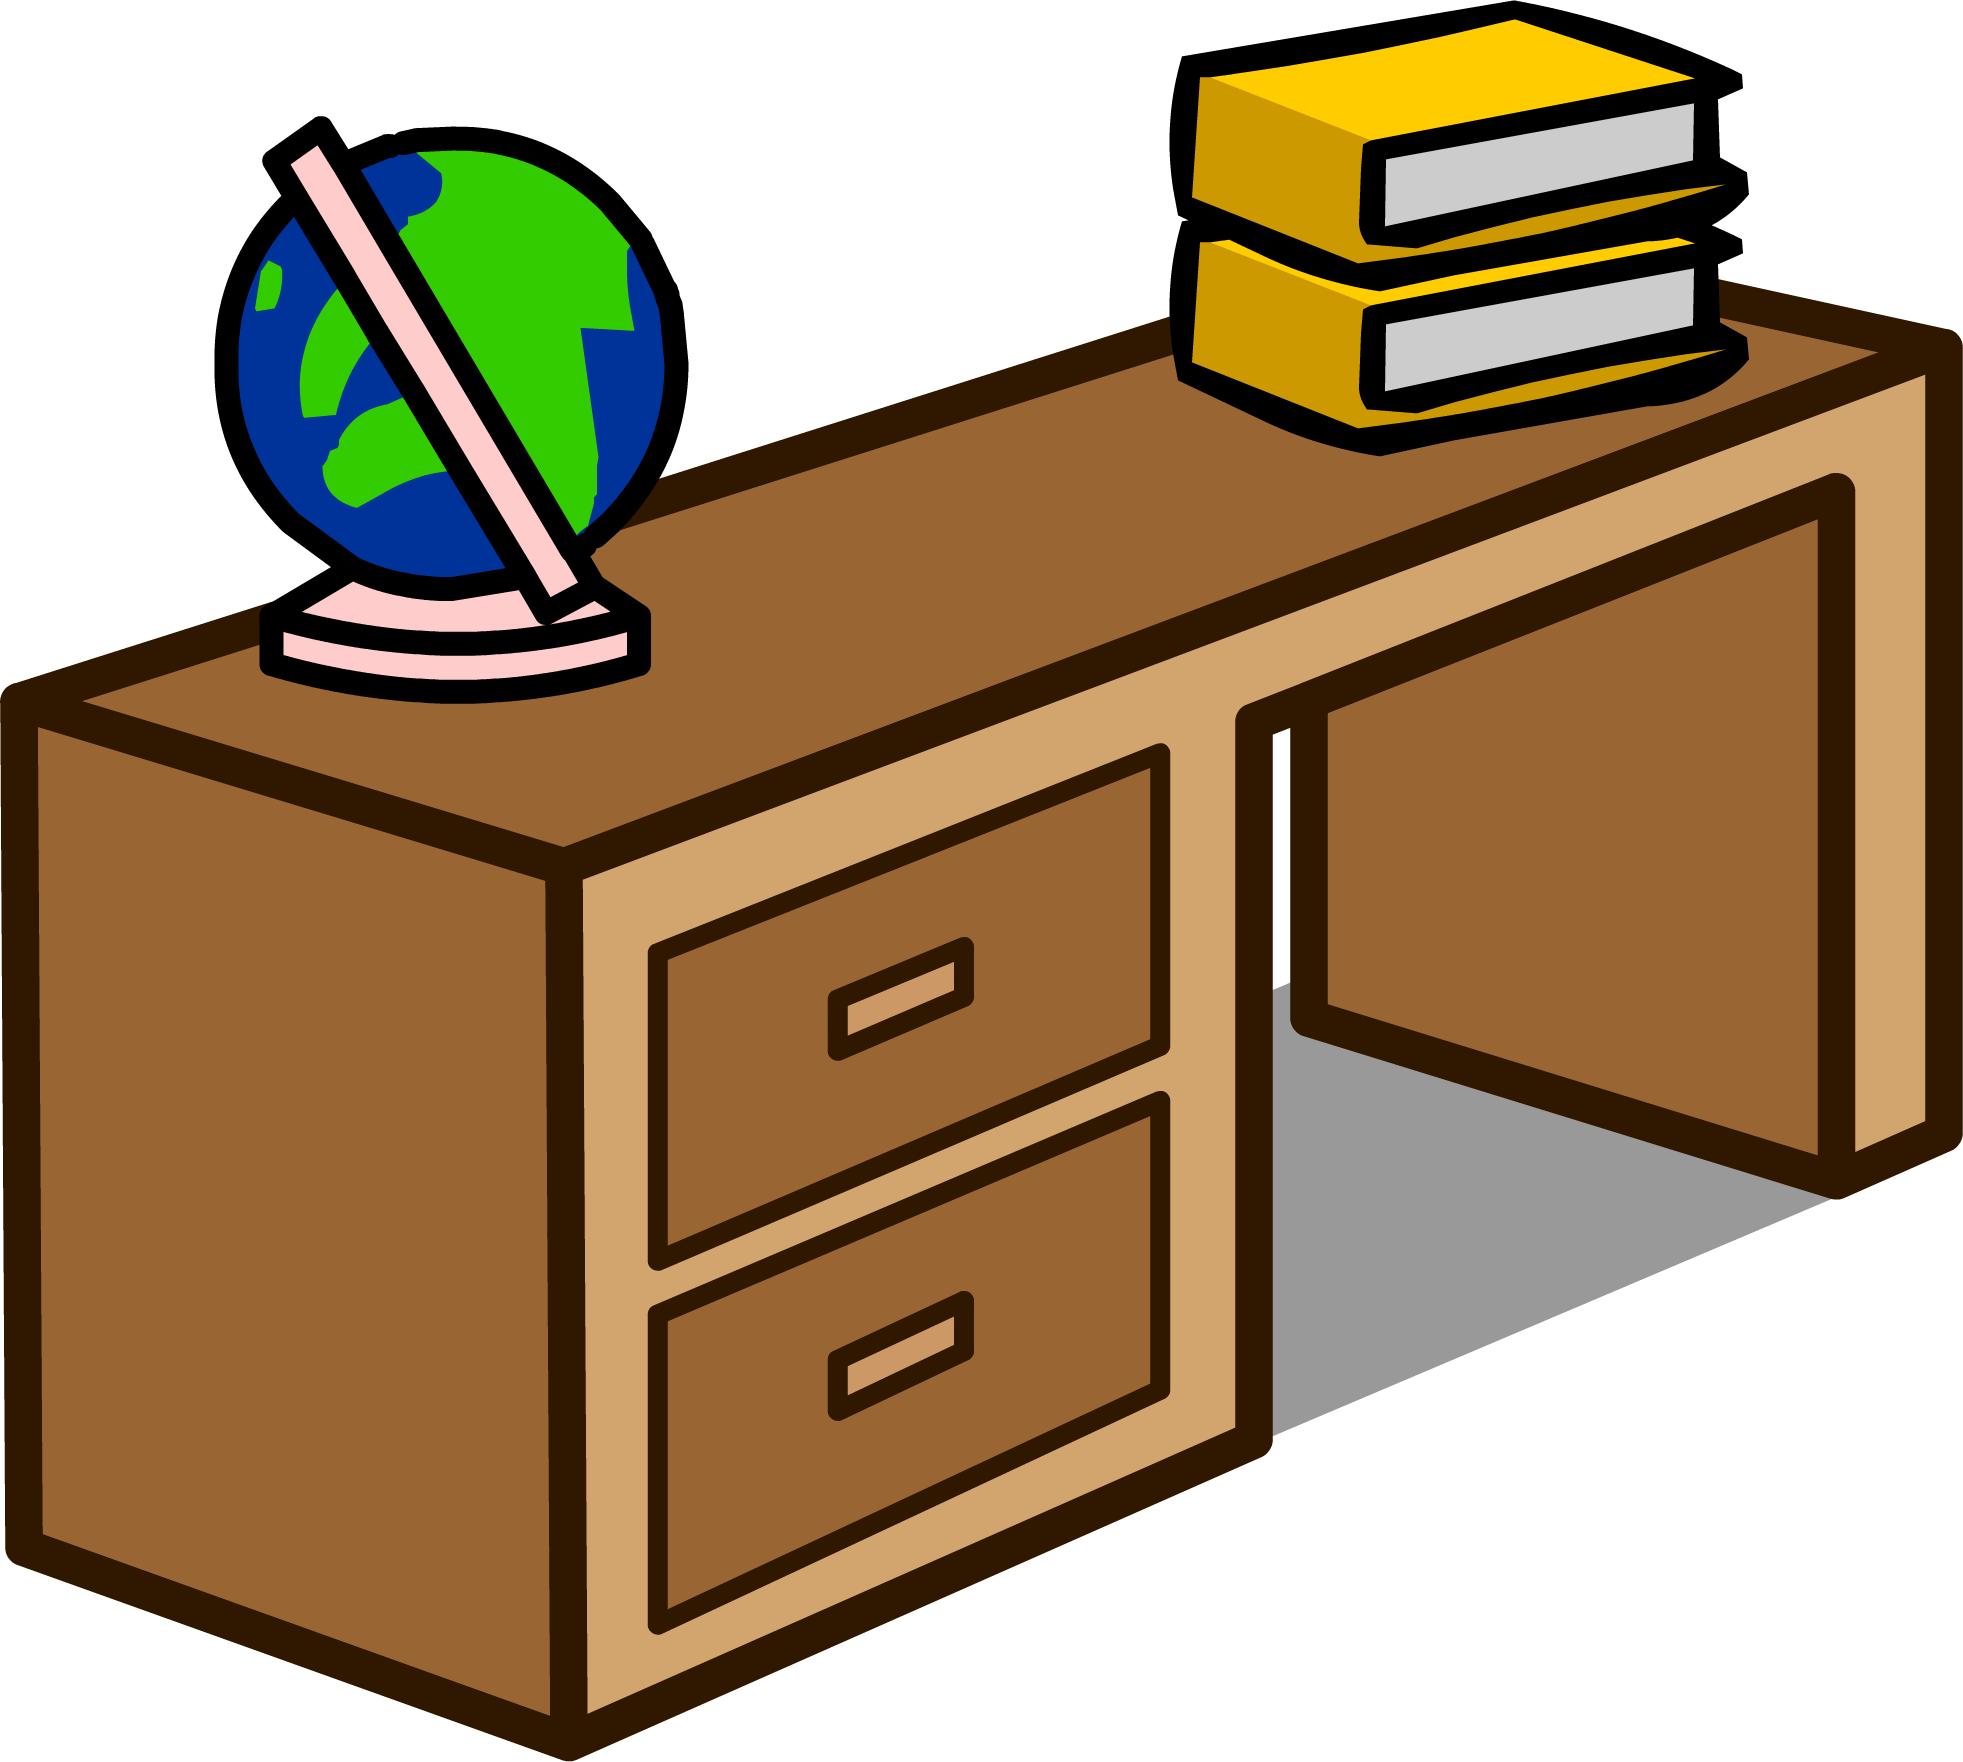 Folder clipart paperwork. Filing papers trendy with